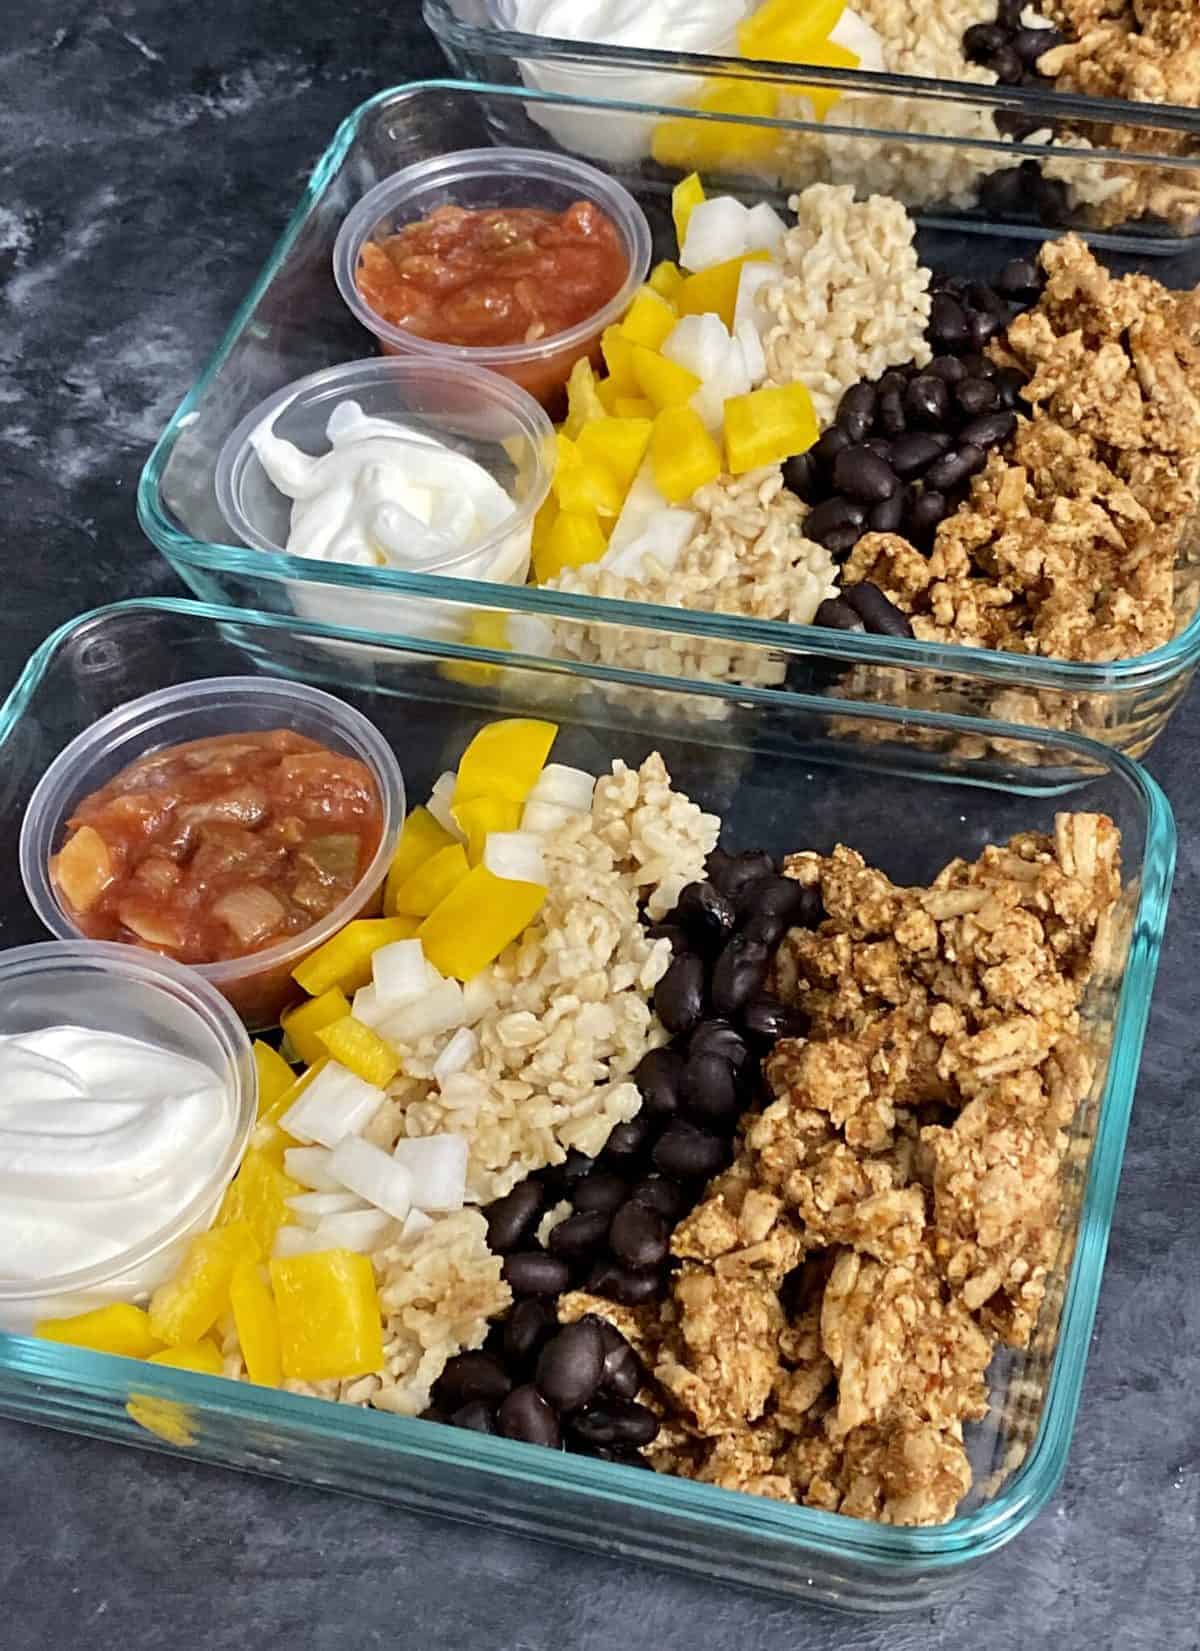 If you want to have a quick high protein lunch or dinner that you can make on Sunday for the week, take a look at this Turkey Taco Bowl.